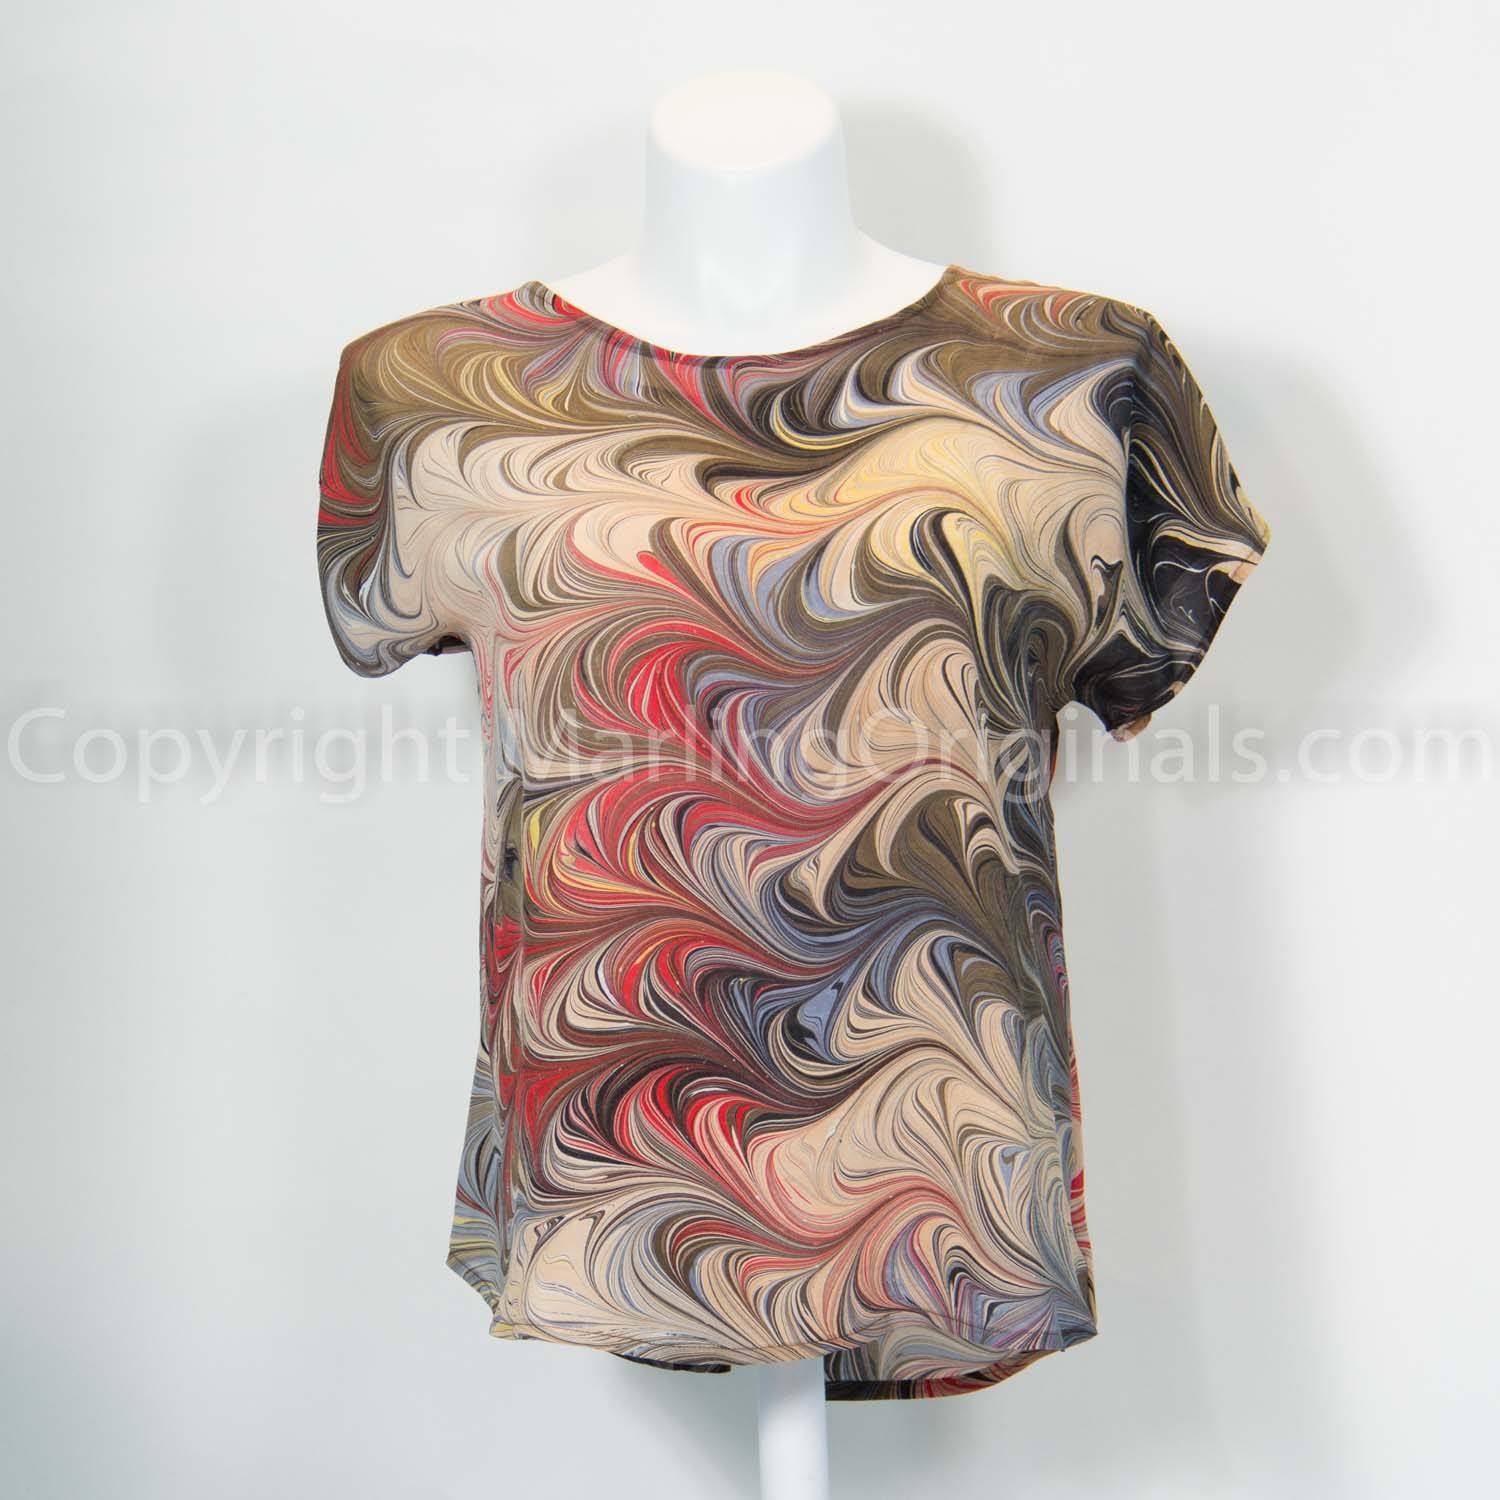 hand marbled silk top in shades of brown with red and gold.  Short sleeves round neck